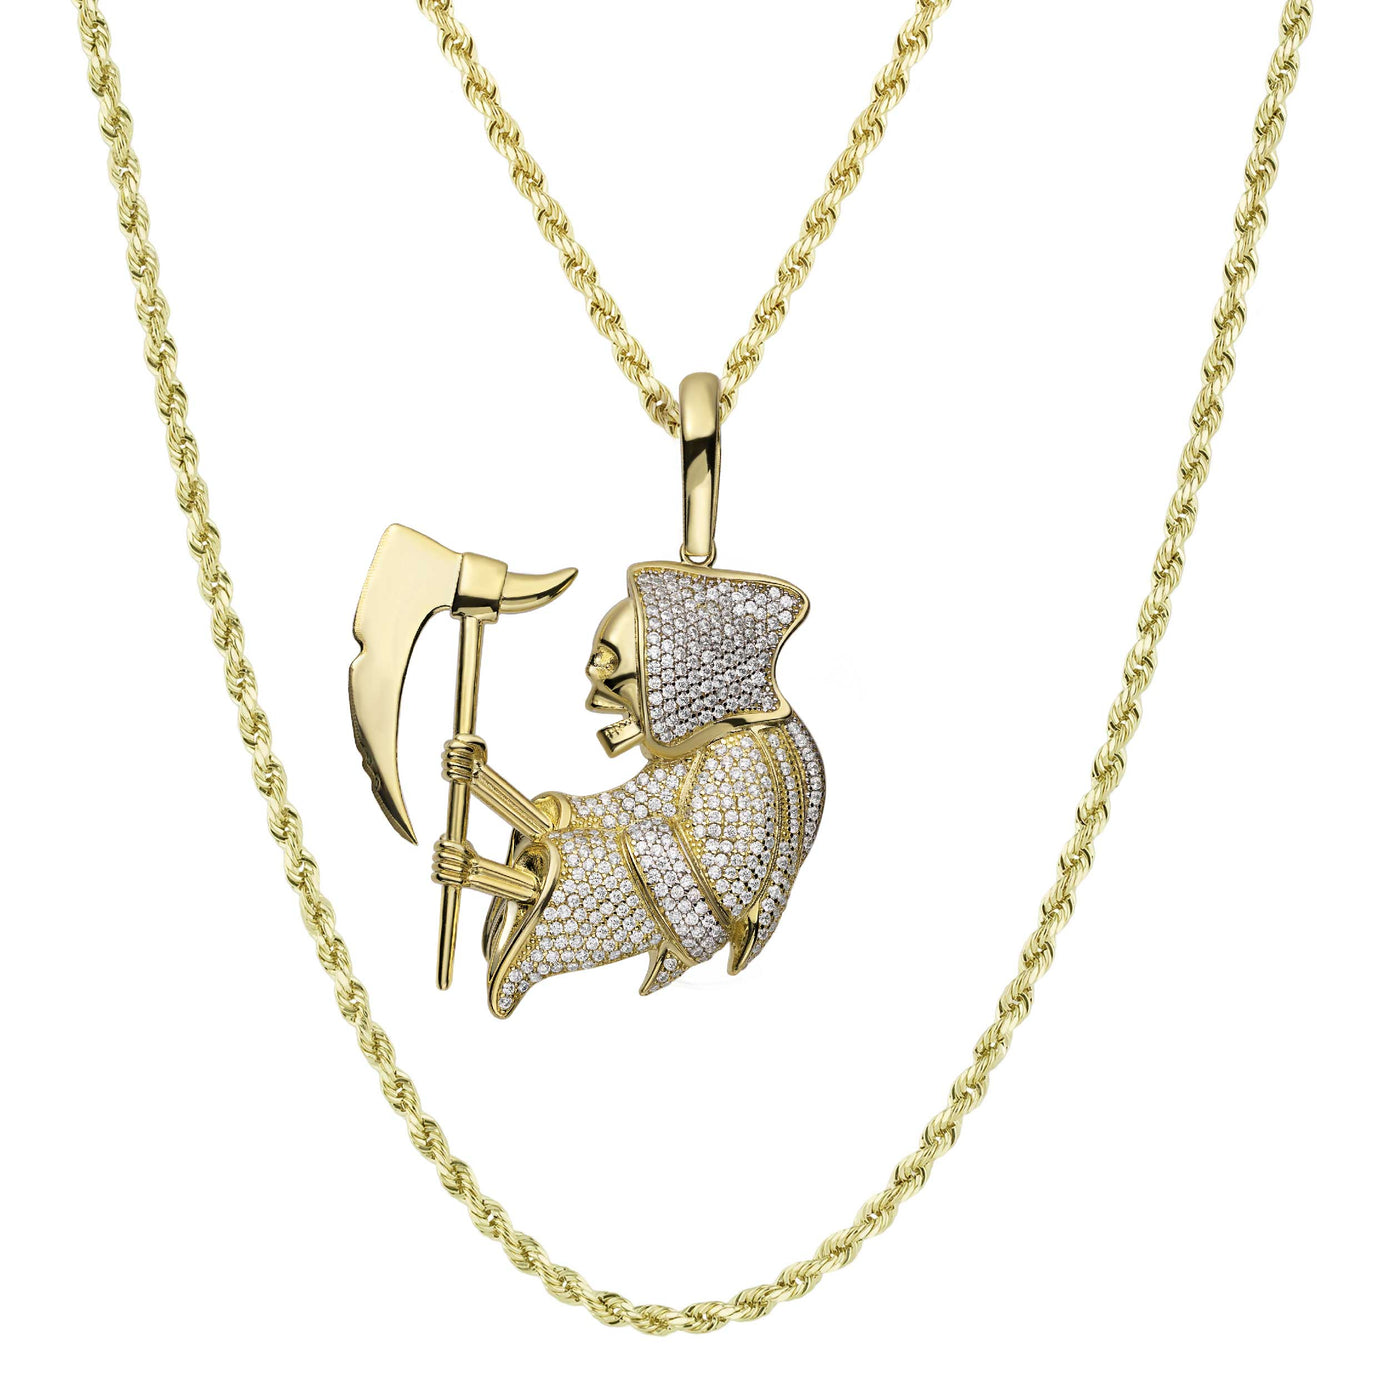 2" CZ Angel of Death Reaper Pendant & Chain Necklace Set 10K Yellow Gold